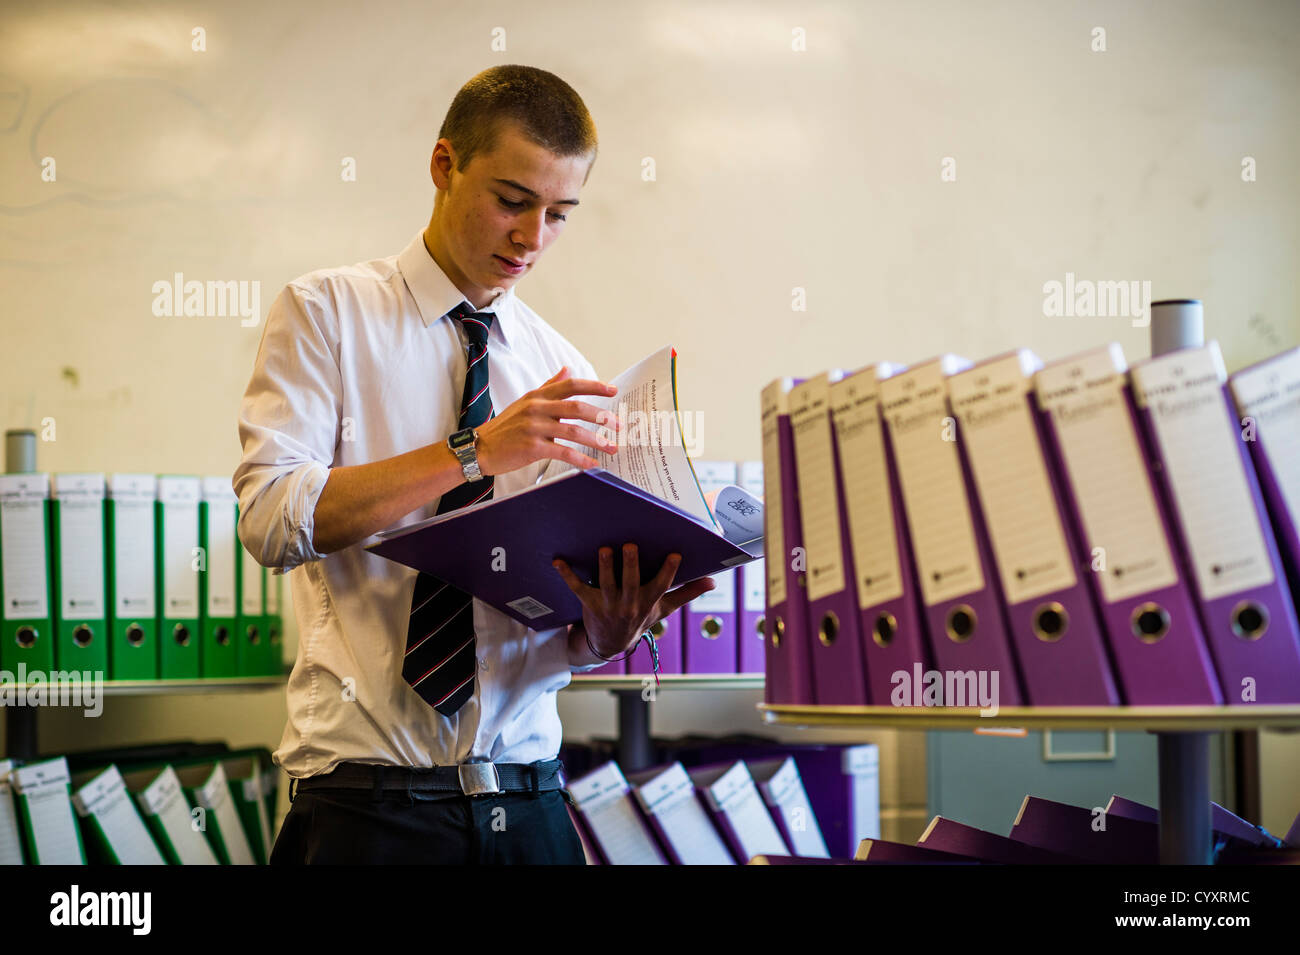 A year 13 6th form boy reading past exam papers at a secondary comprehensive school, Wales UK Stock Photo